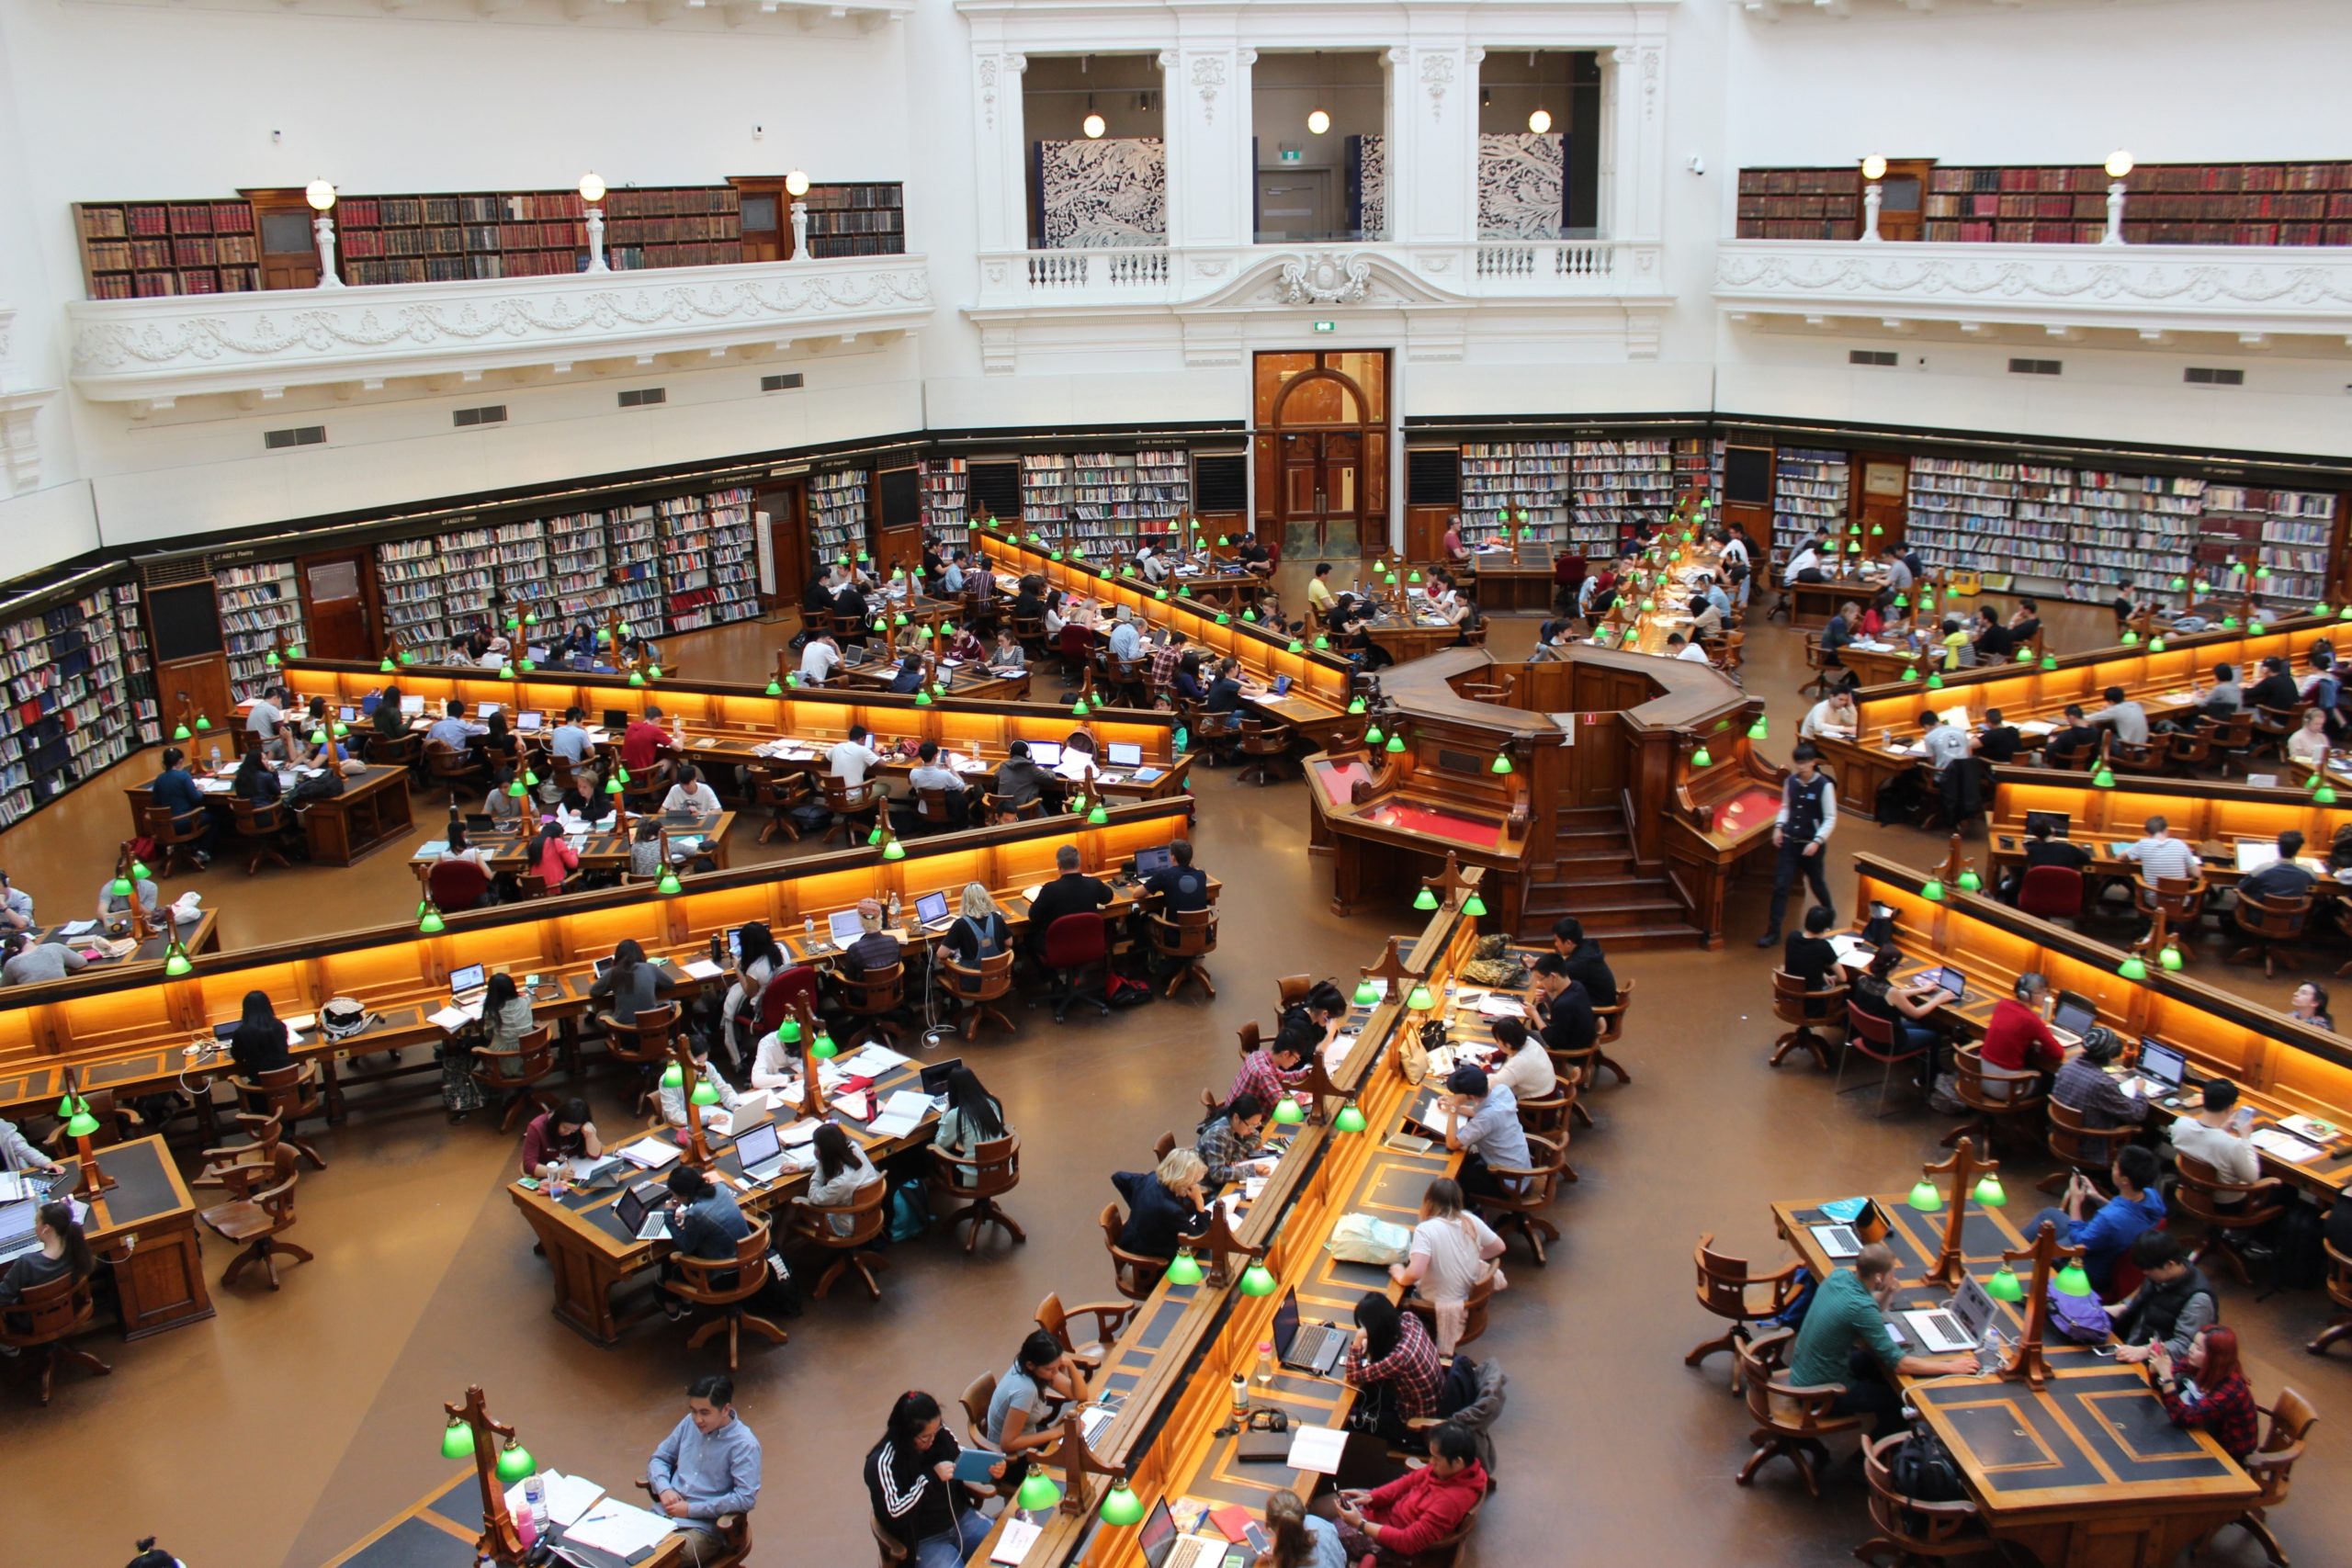 College Library (Source: Pixabay)